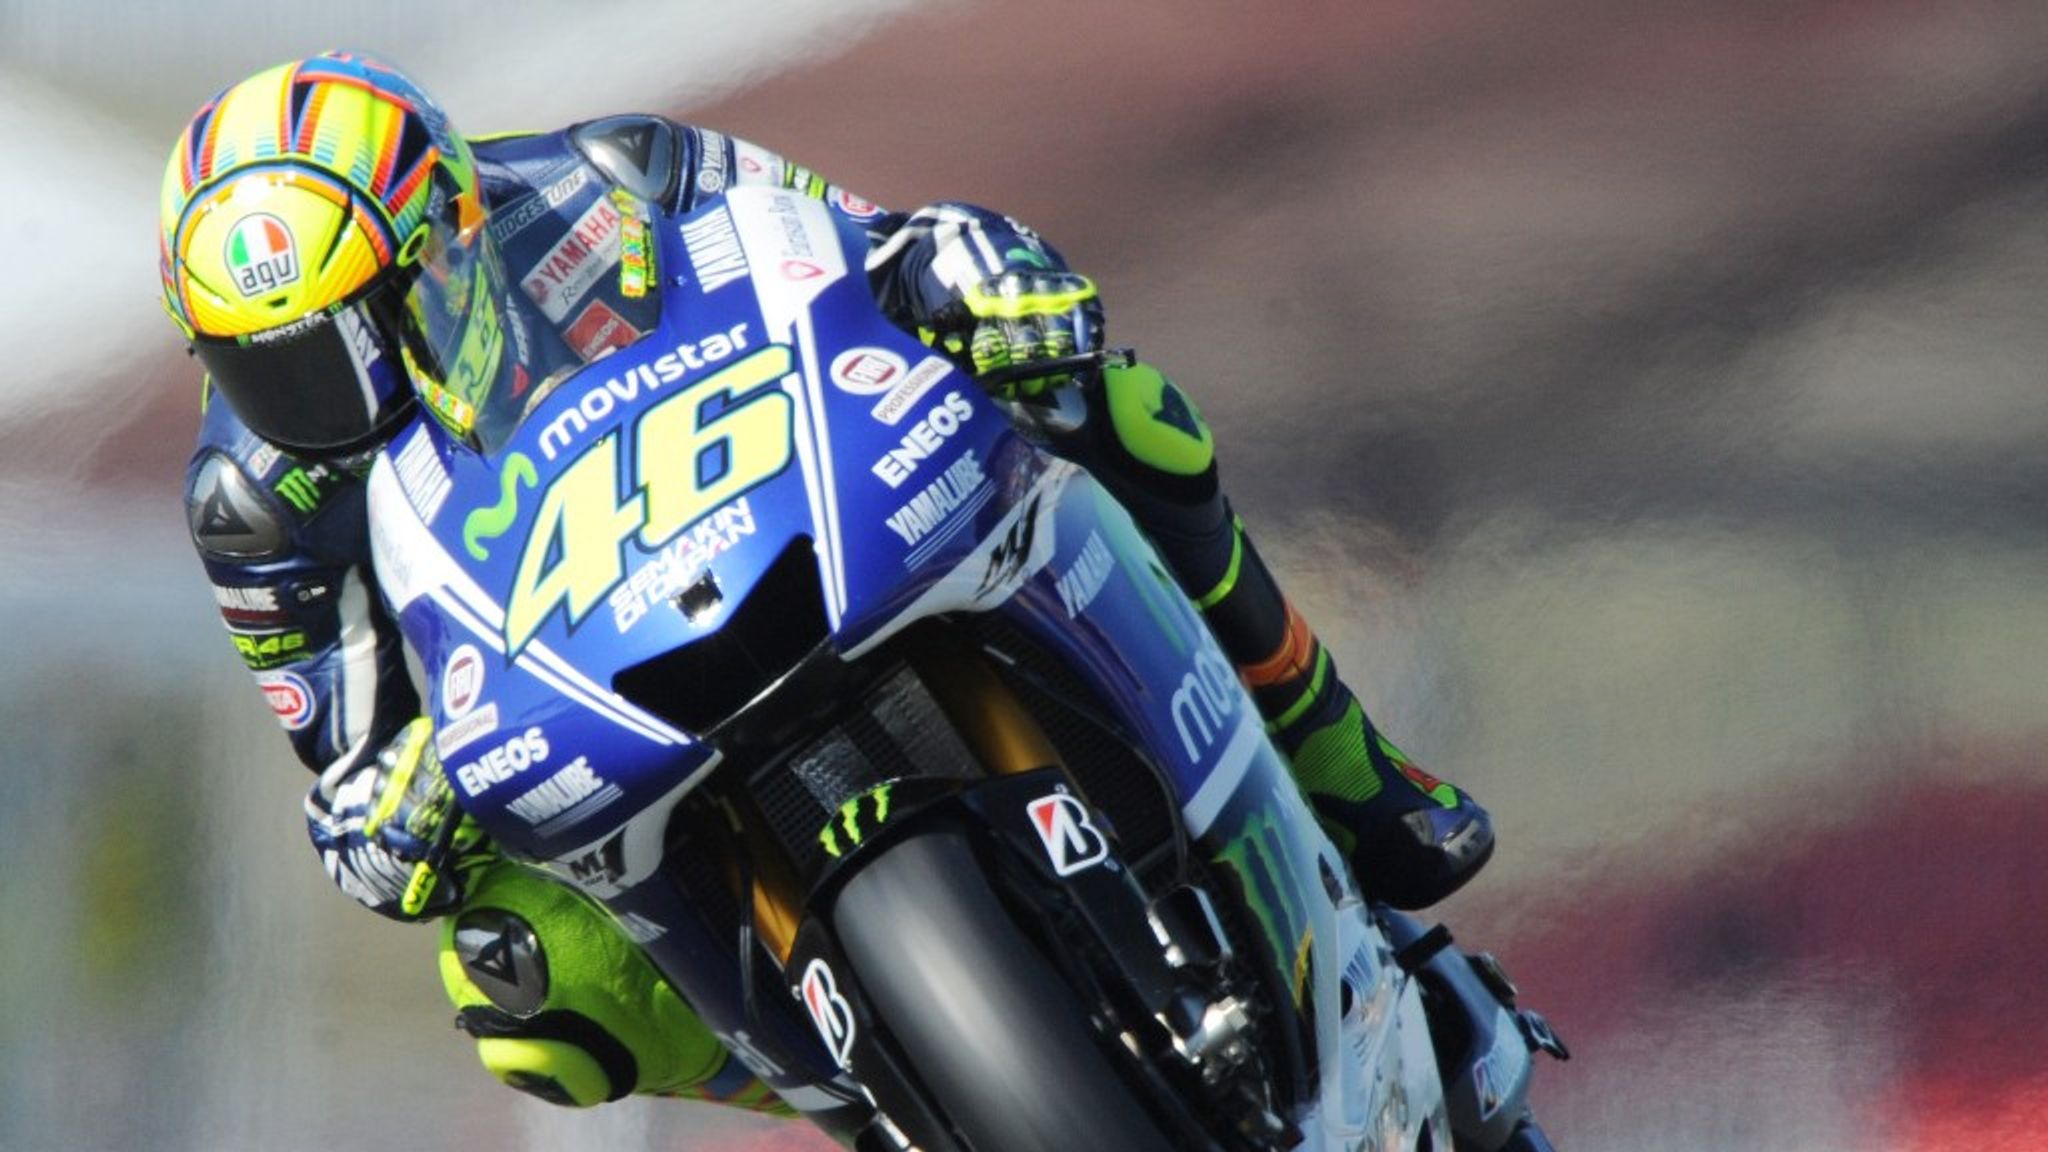 MotoGP: Valentino Rossi new two-year contract with Movistar Yamaha | Motor Sport News | Sky Sports